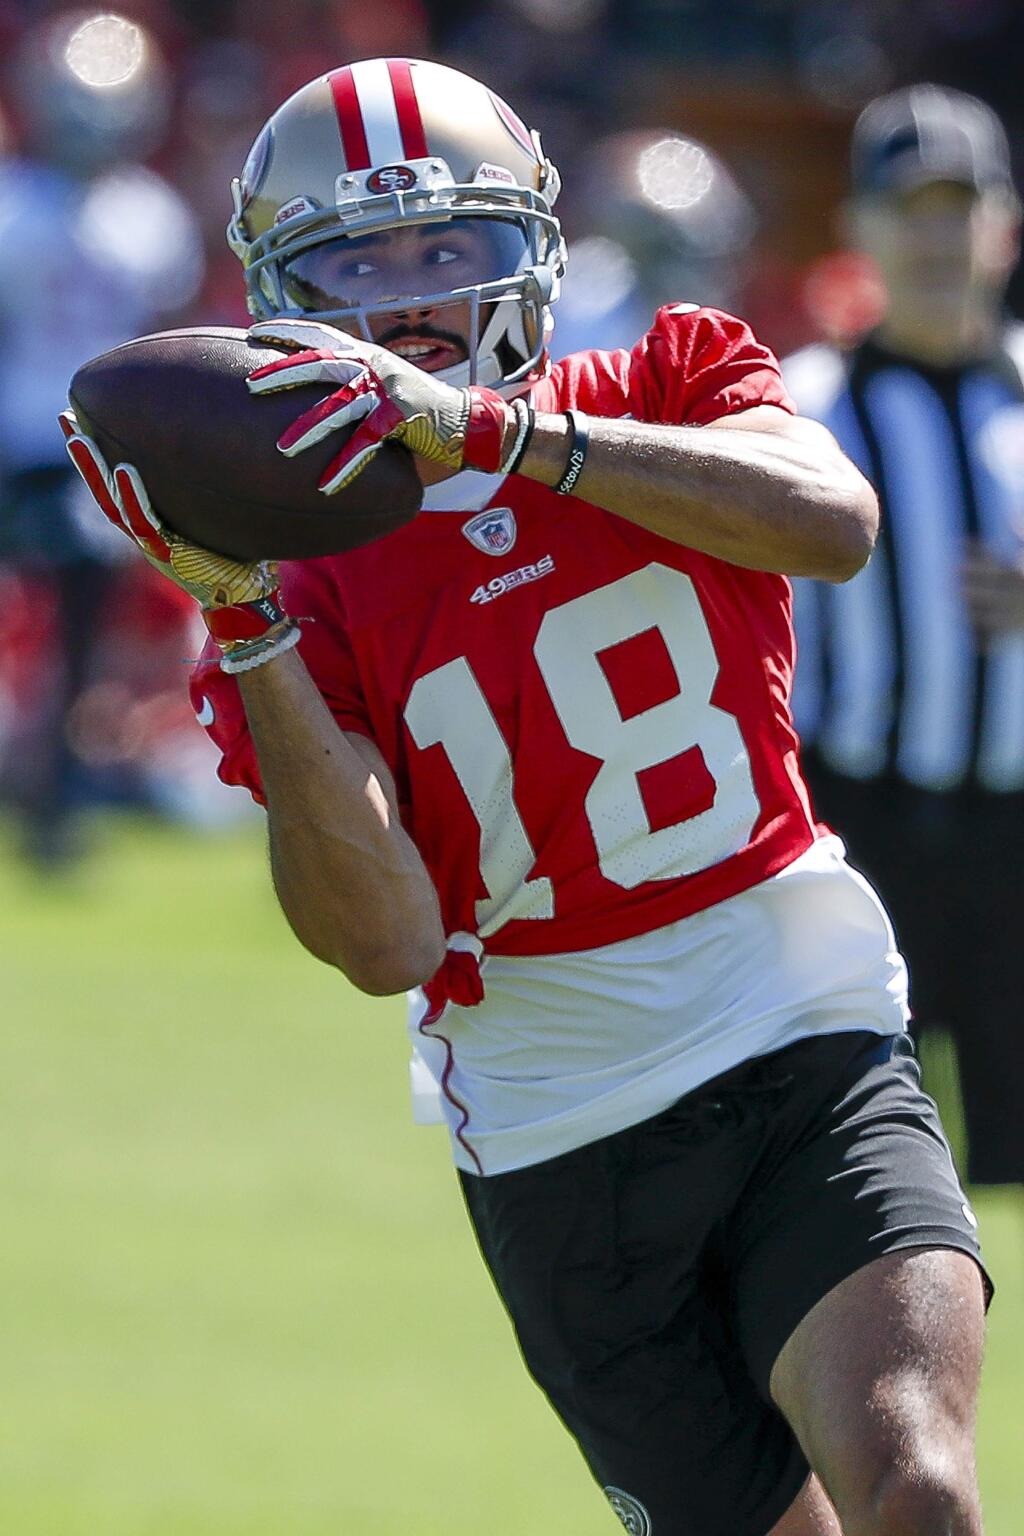 San Francisco 49ers wide receiver Dante Pettis catches a pass during practice at the team's headquarters Friday, July 27, 2018, in Santa Clara. (AP Photo/Tony Avelar)